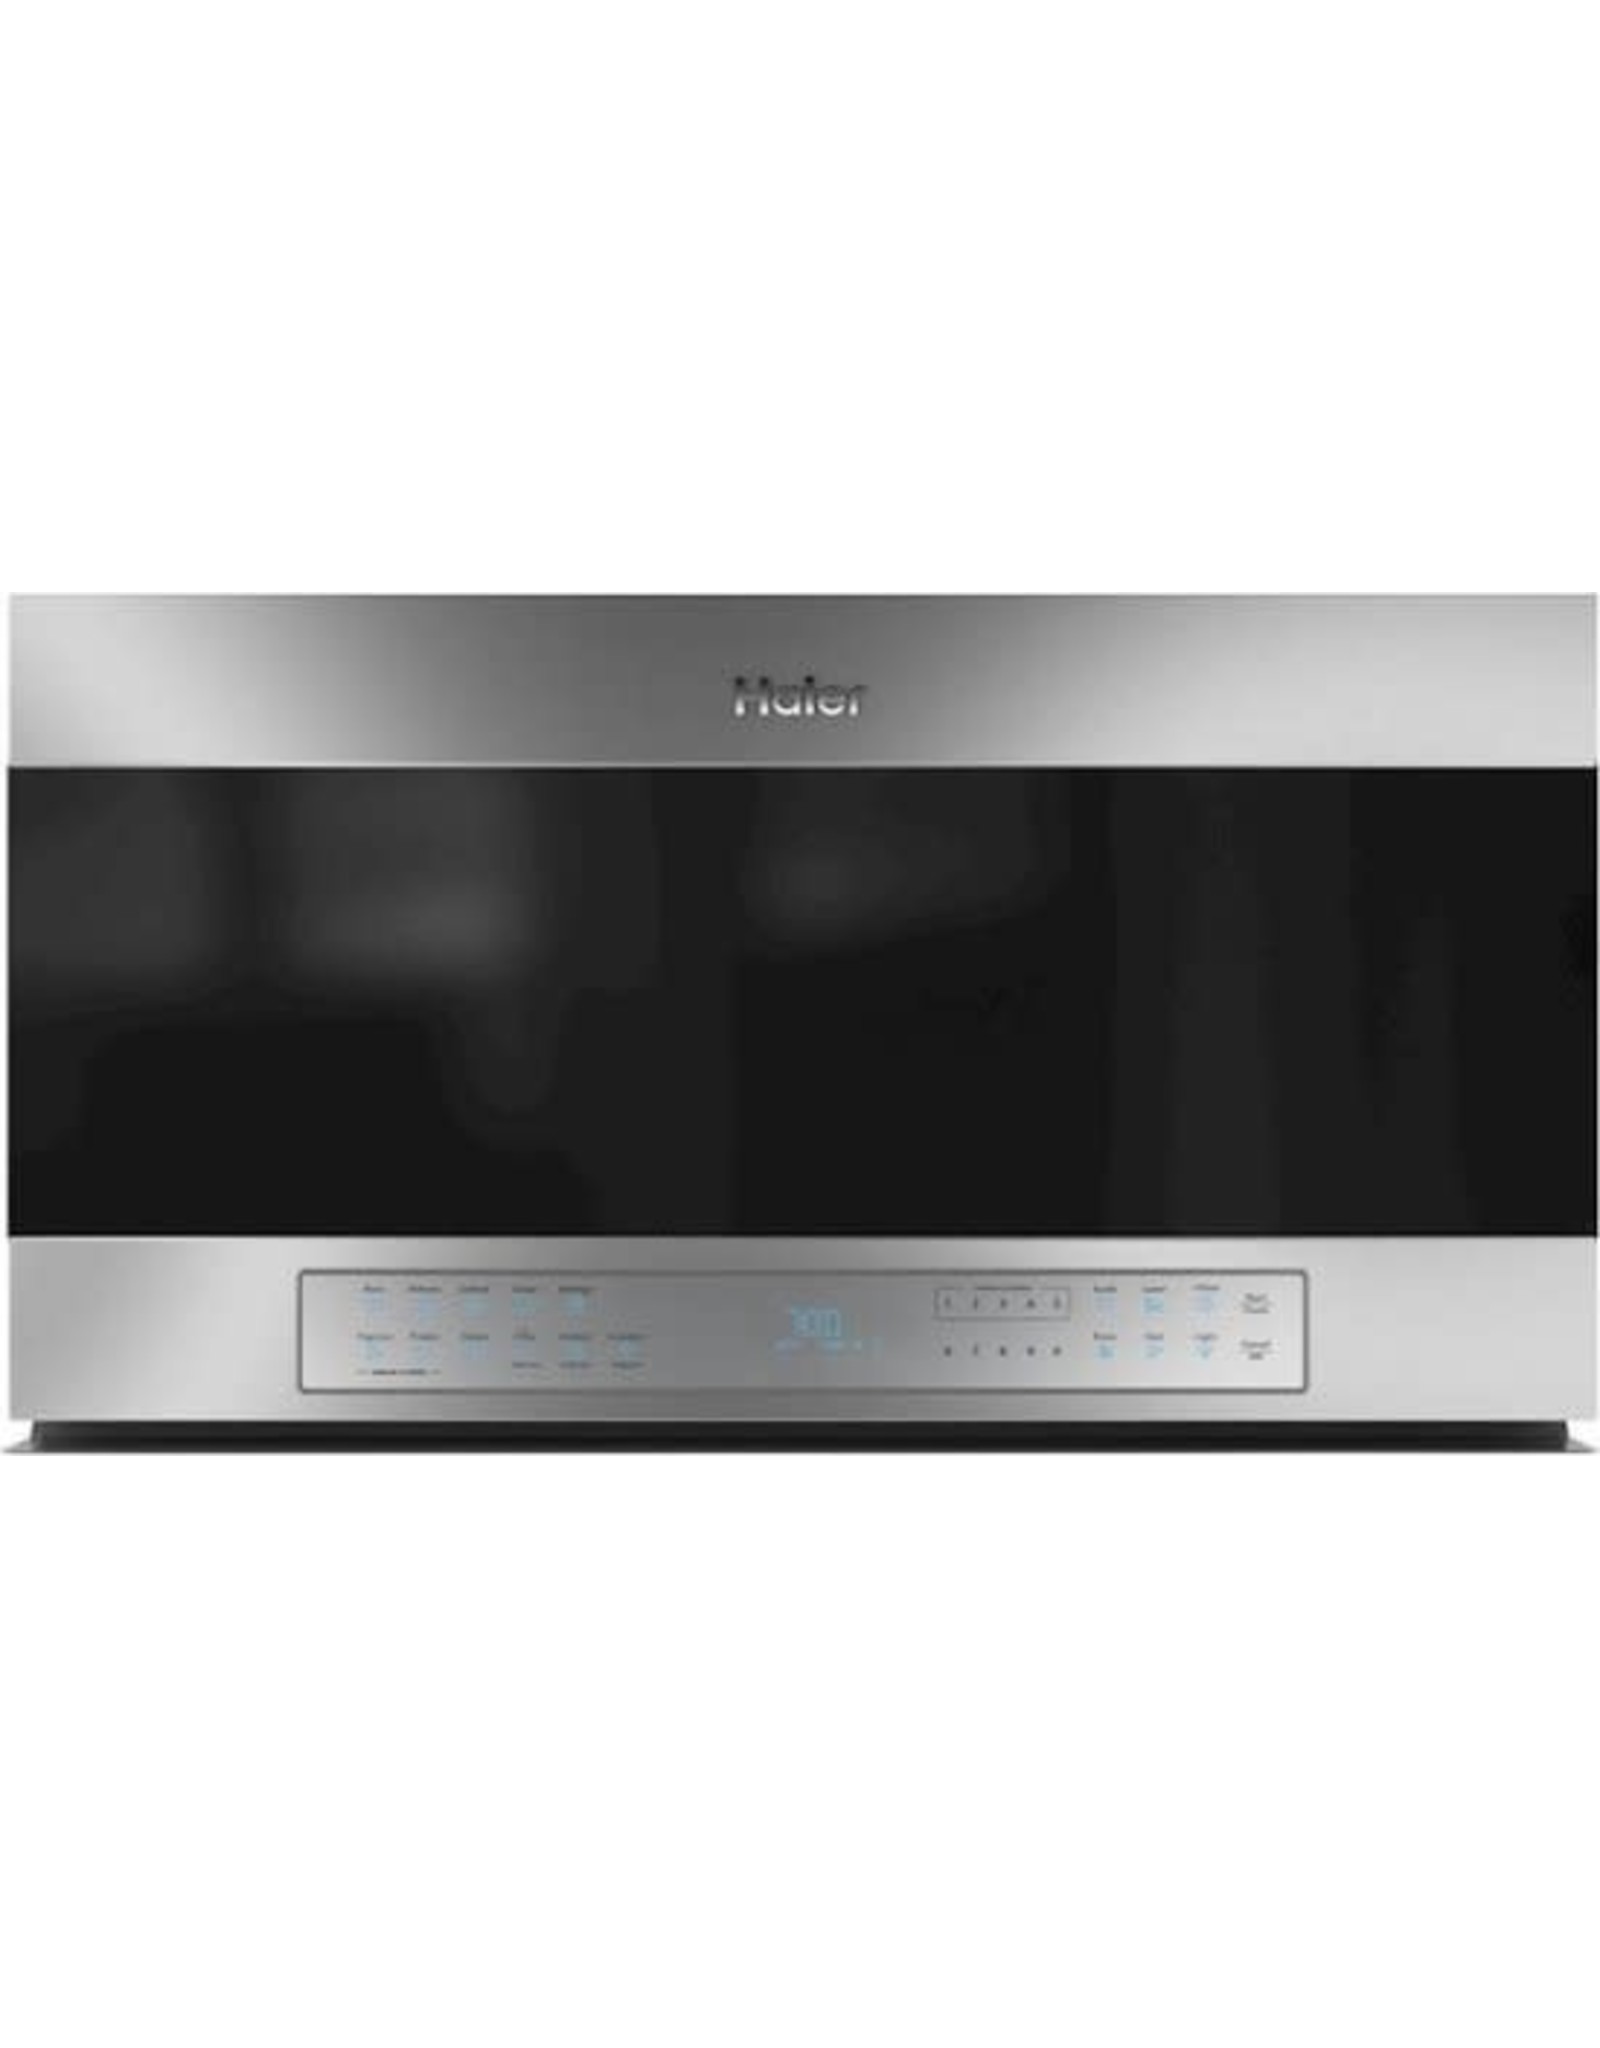 Haier QVM7167RNSS Haier - 1.6 Cu. Ft. Over-the-Range Microwave with Sensor Cooking and Built-In Wi-Fi - Stainless steel